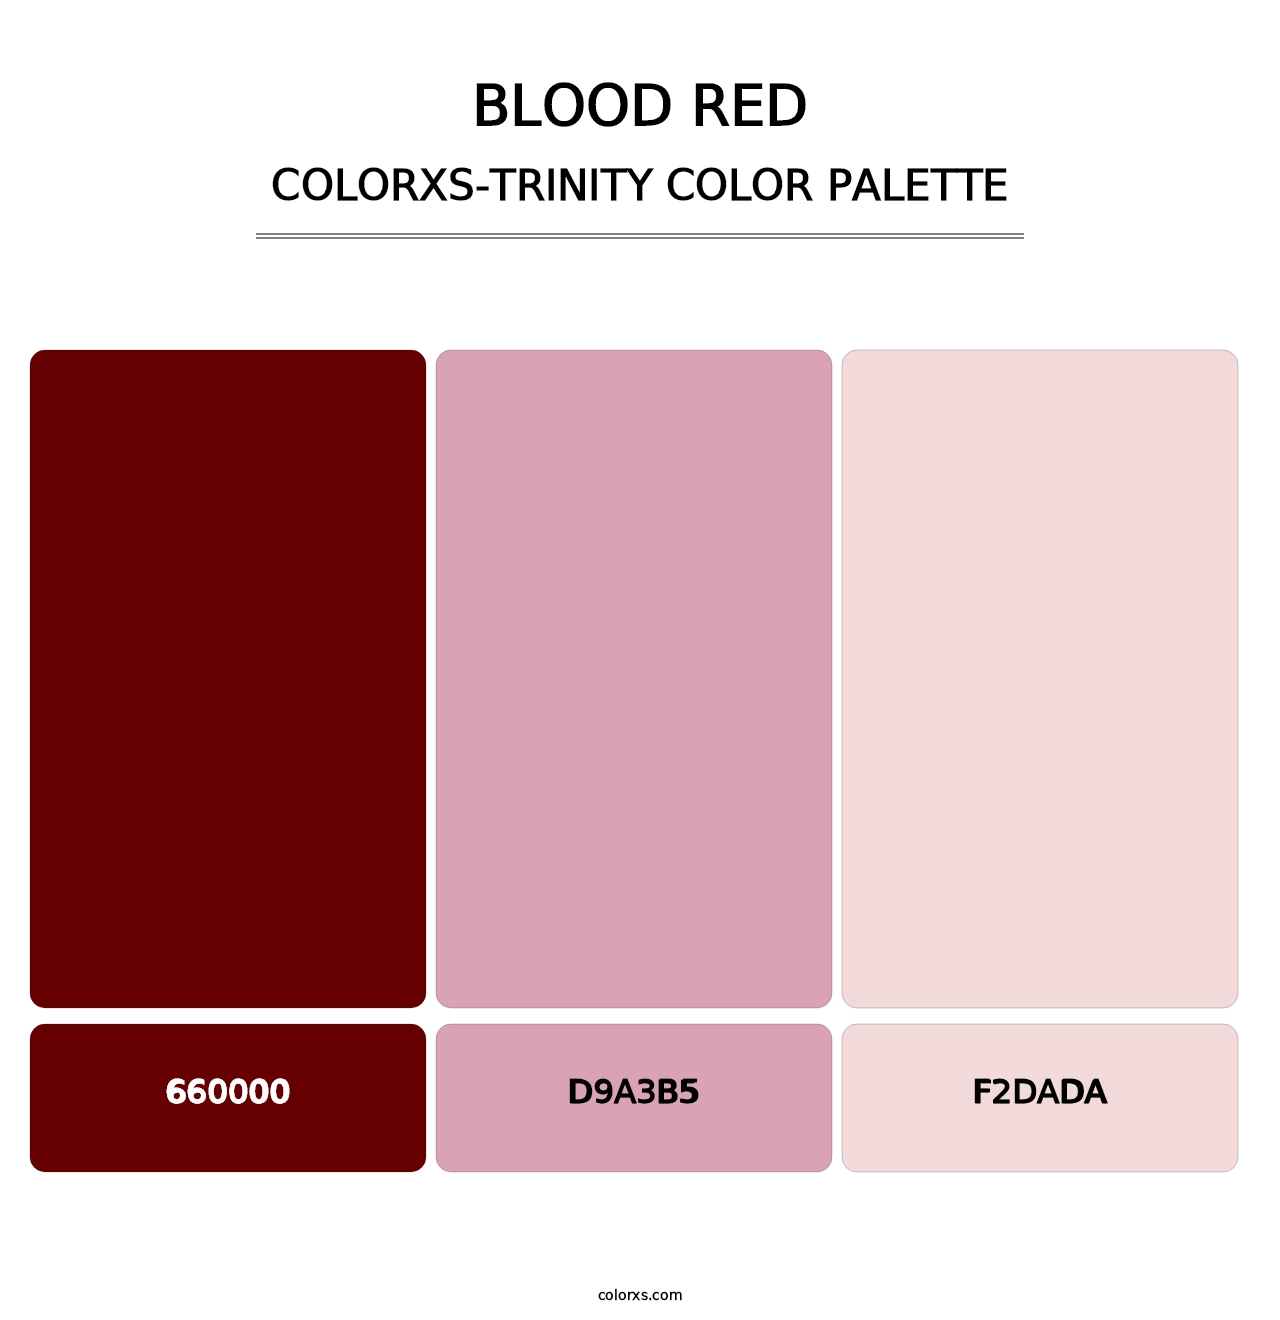 Blood Red - Colorxs Trinity Palette